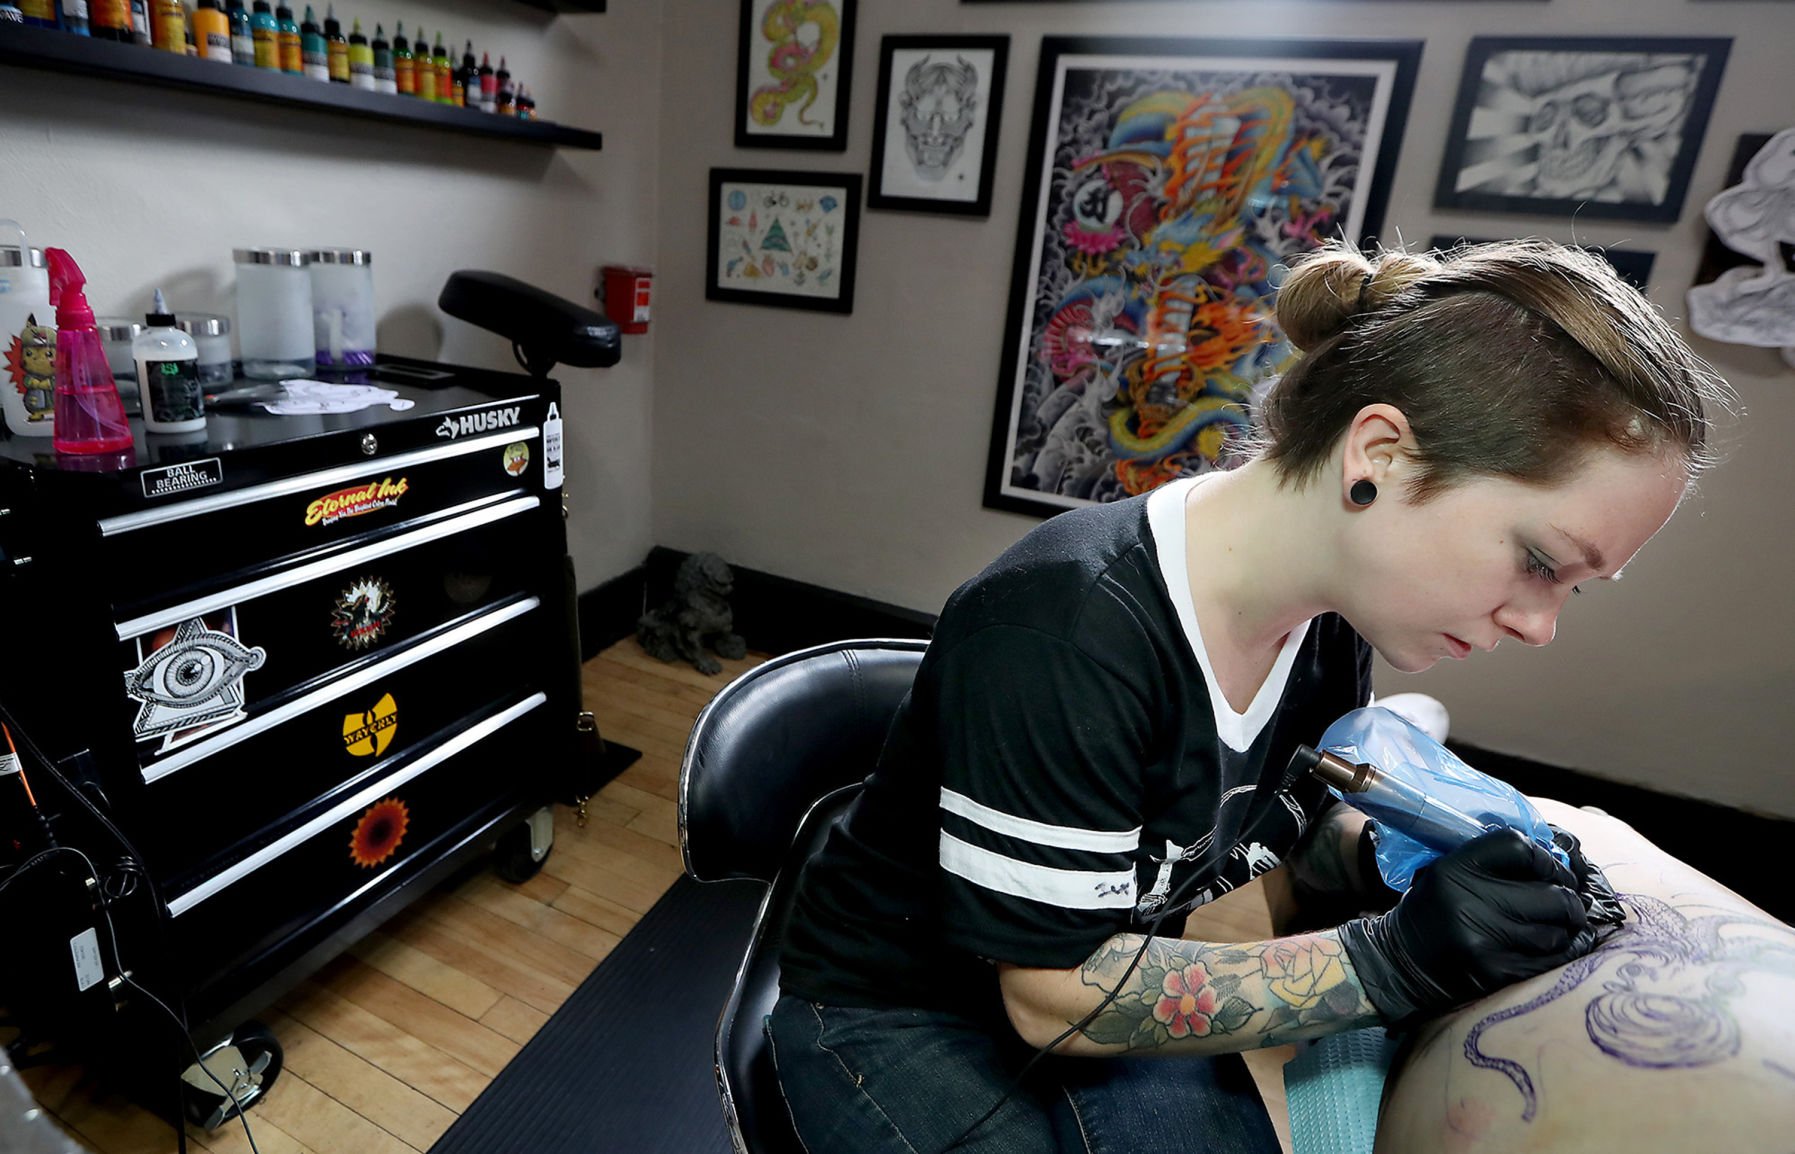 Jefferson City areas only female tattoo artist reflects on her experiences